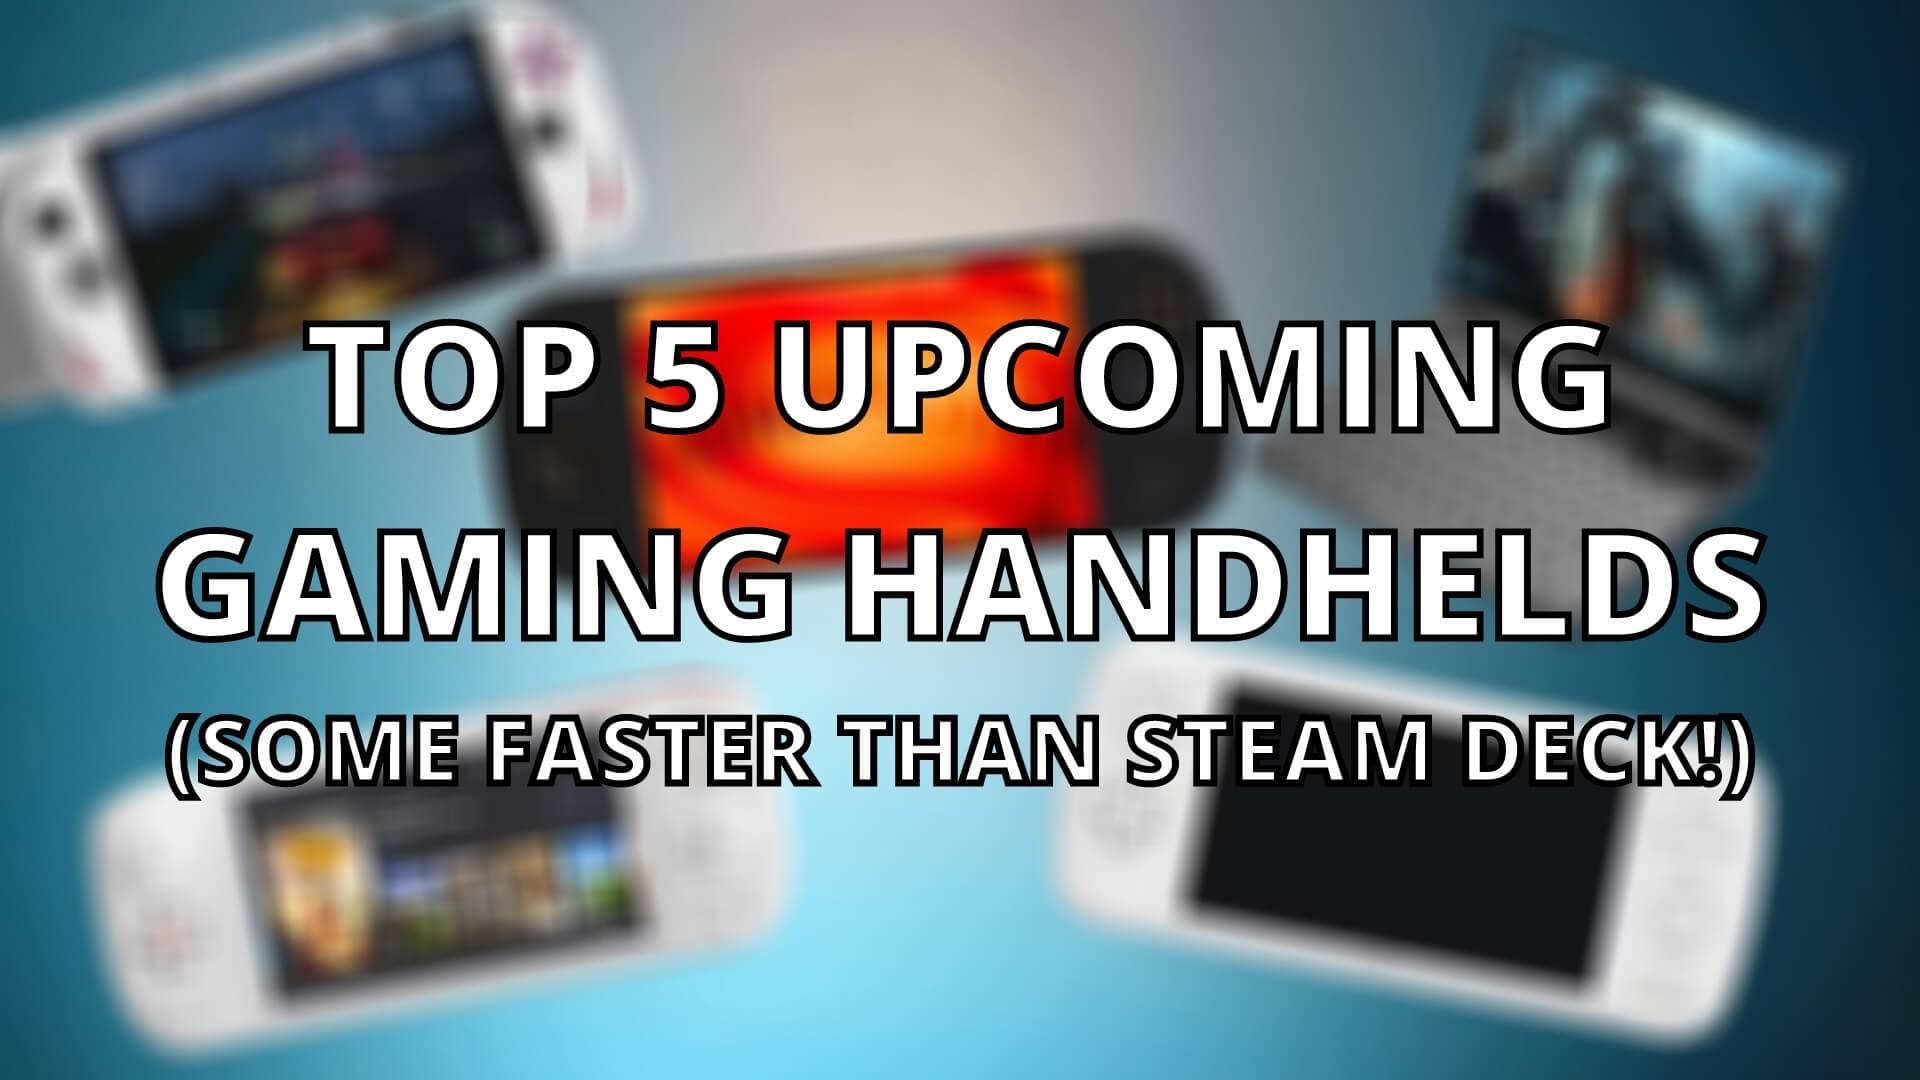 Top 5 upcoming PC Gaming Handhelds of 2022 with video